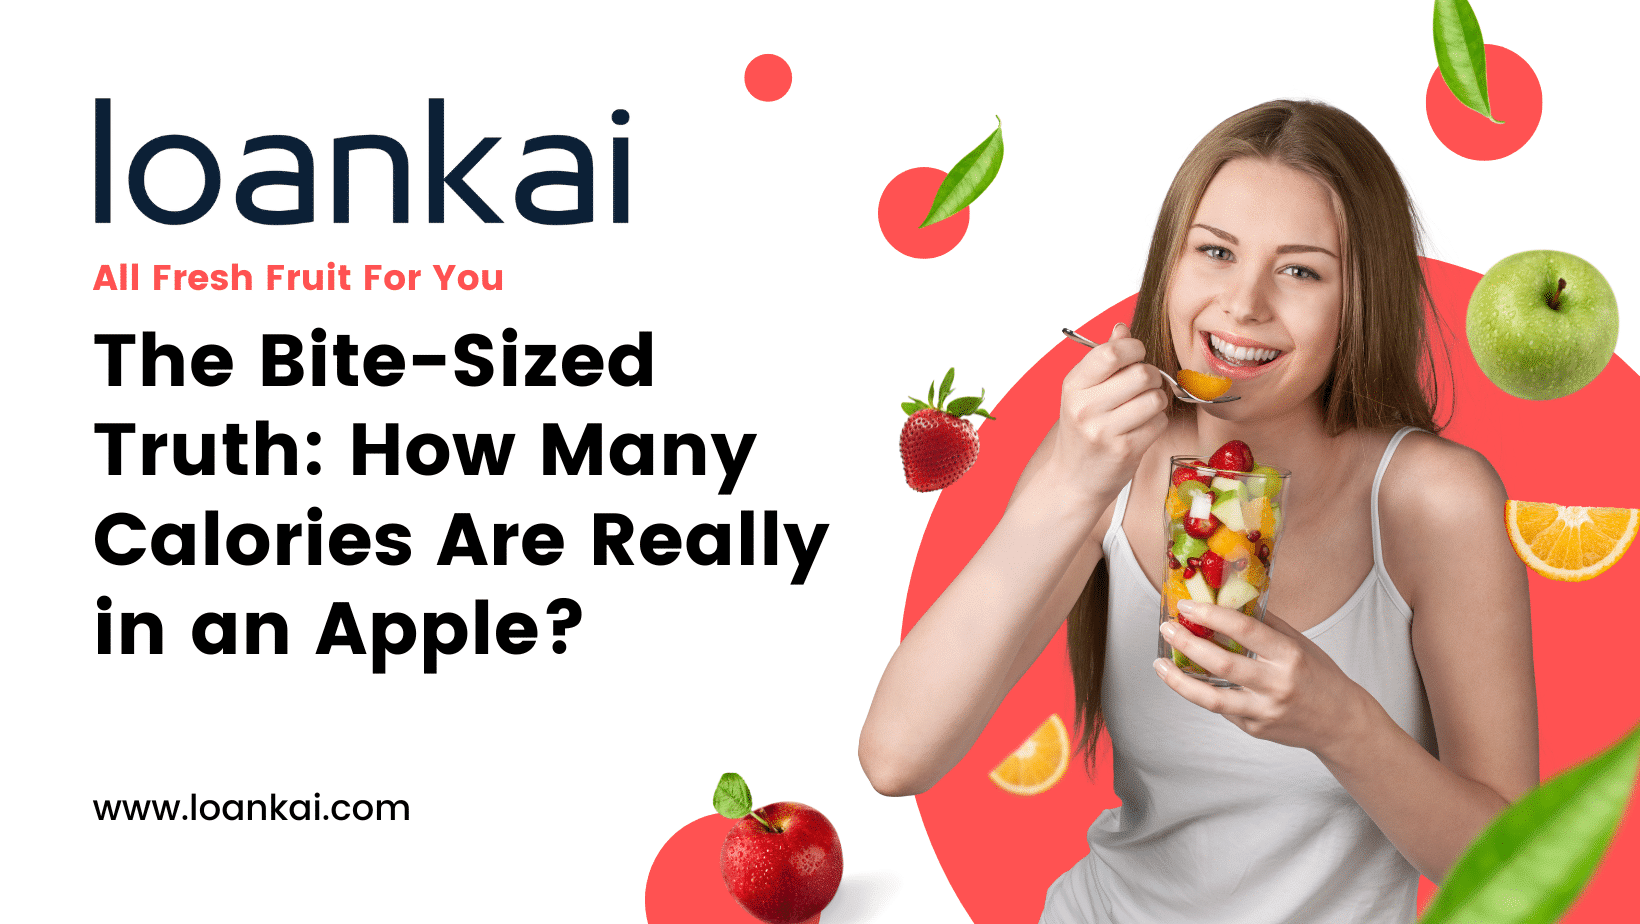 The Bite-Sized Truth: How Many Calories Are Really in an Apple?